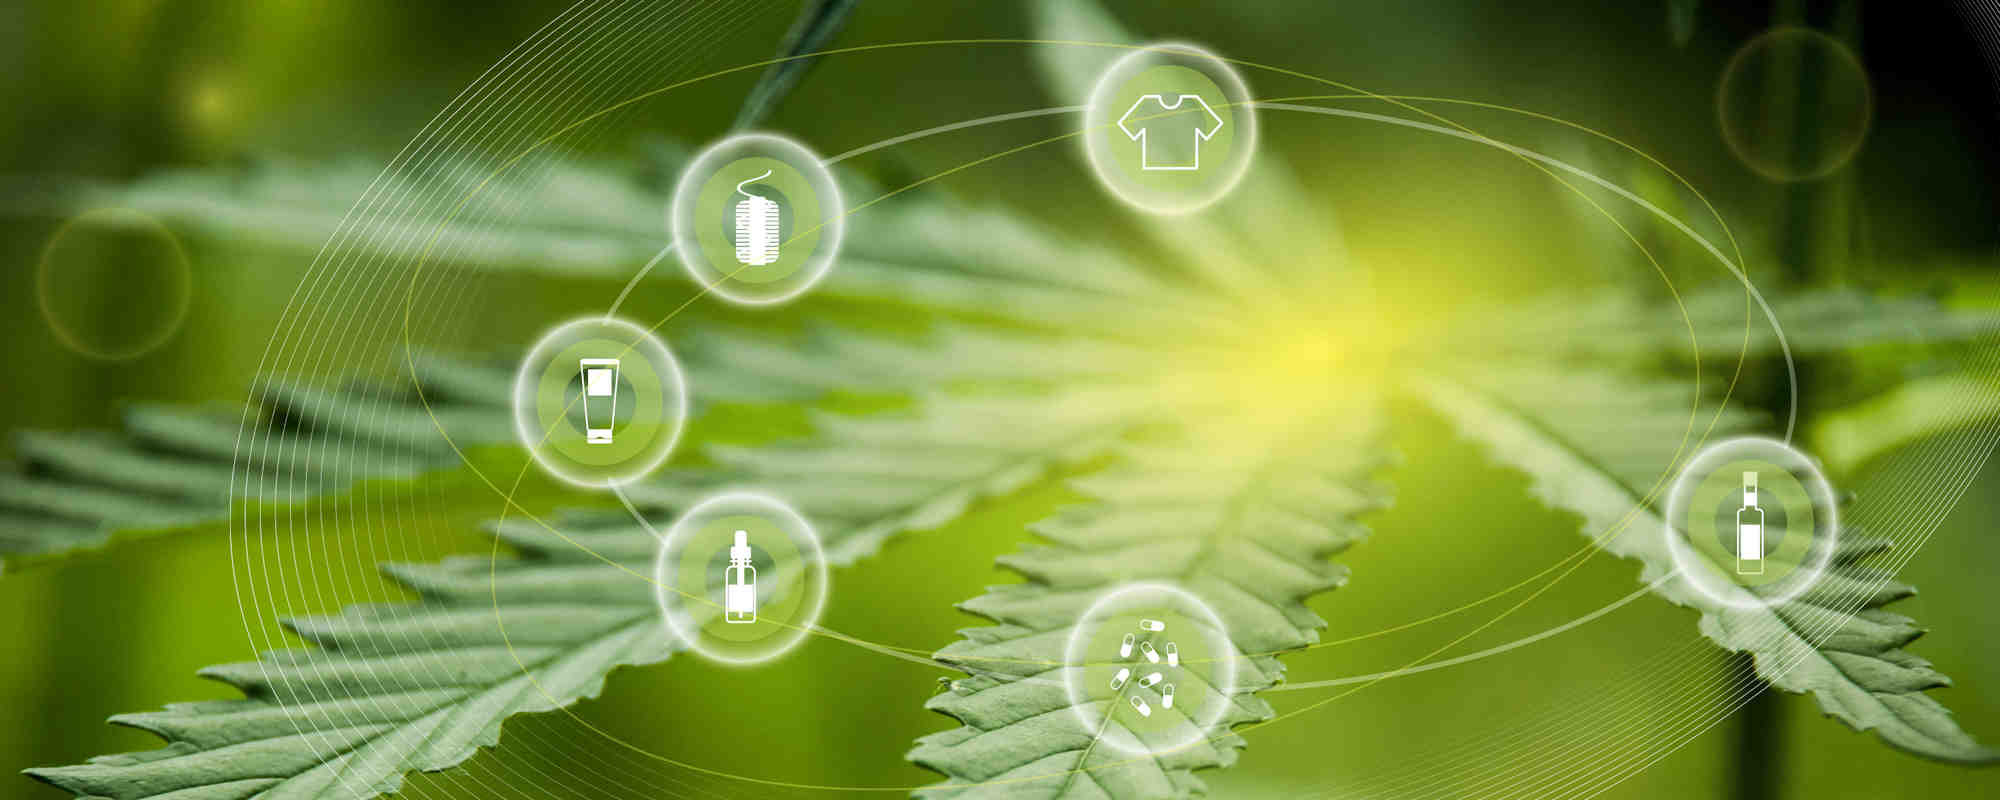 Cannabis Laboratory: Short-Term Challenges and Long-Term Growth for an Evolving Industry